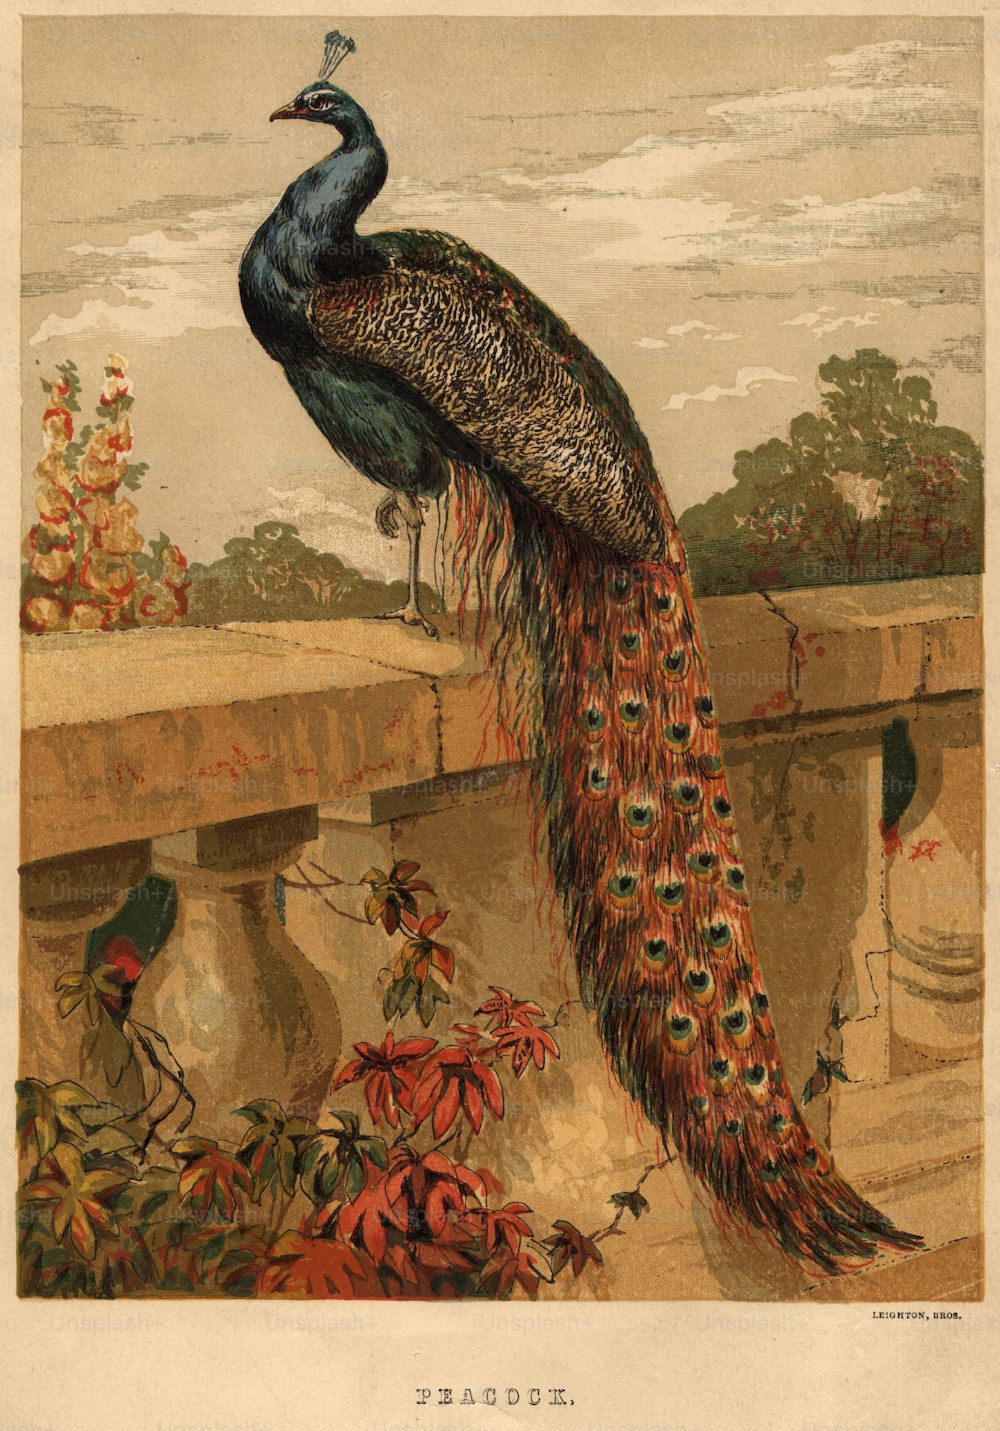 circa 1900:  A peacock sitting on a balustrade.  Leighton Brothers  (Photo by Hulton Archive/Getty Images)